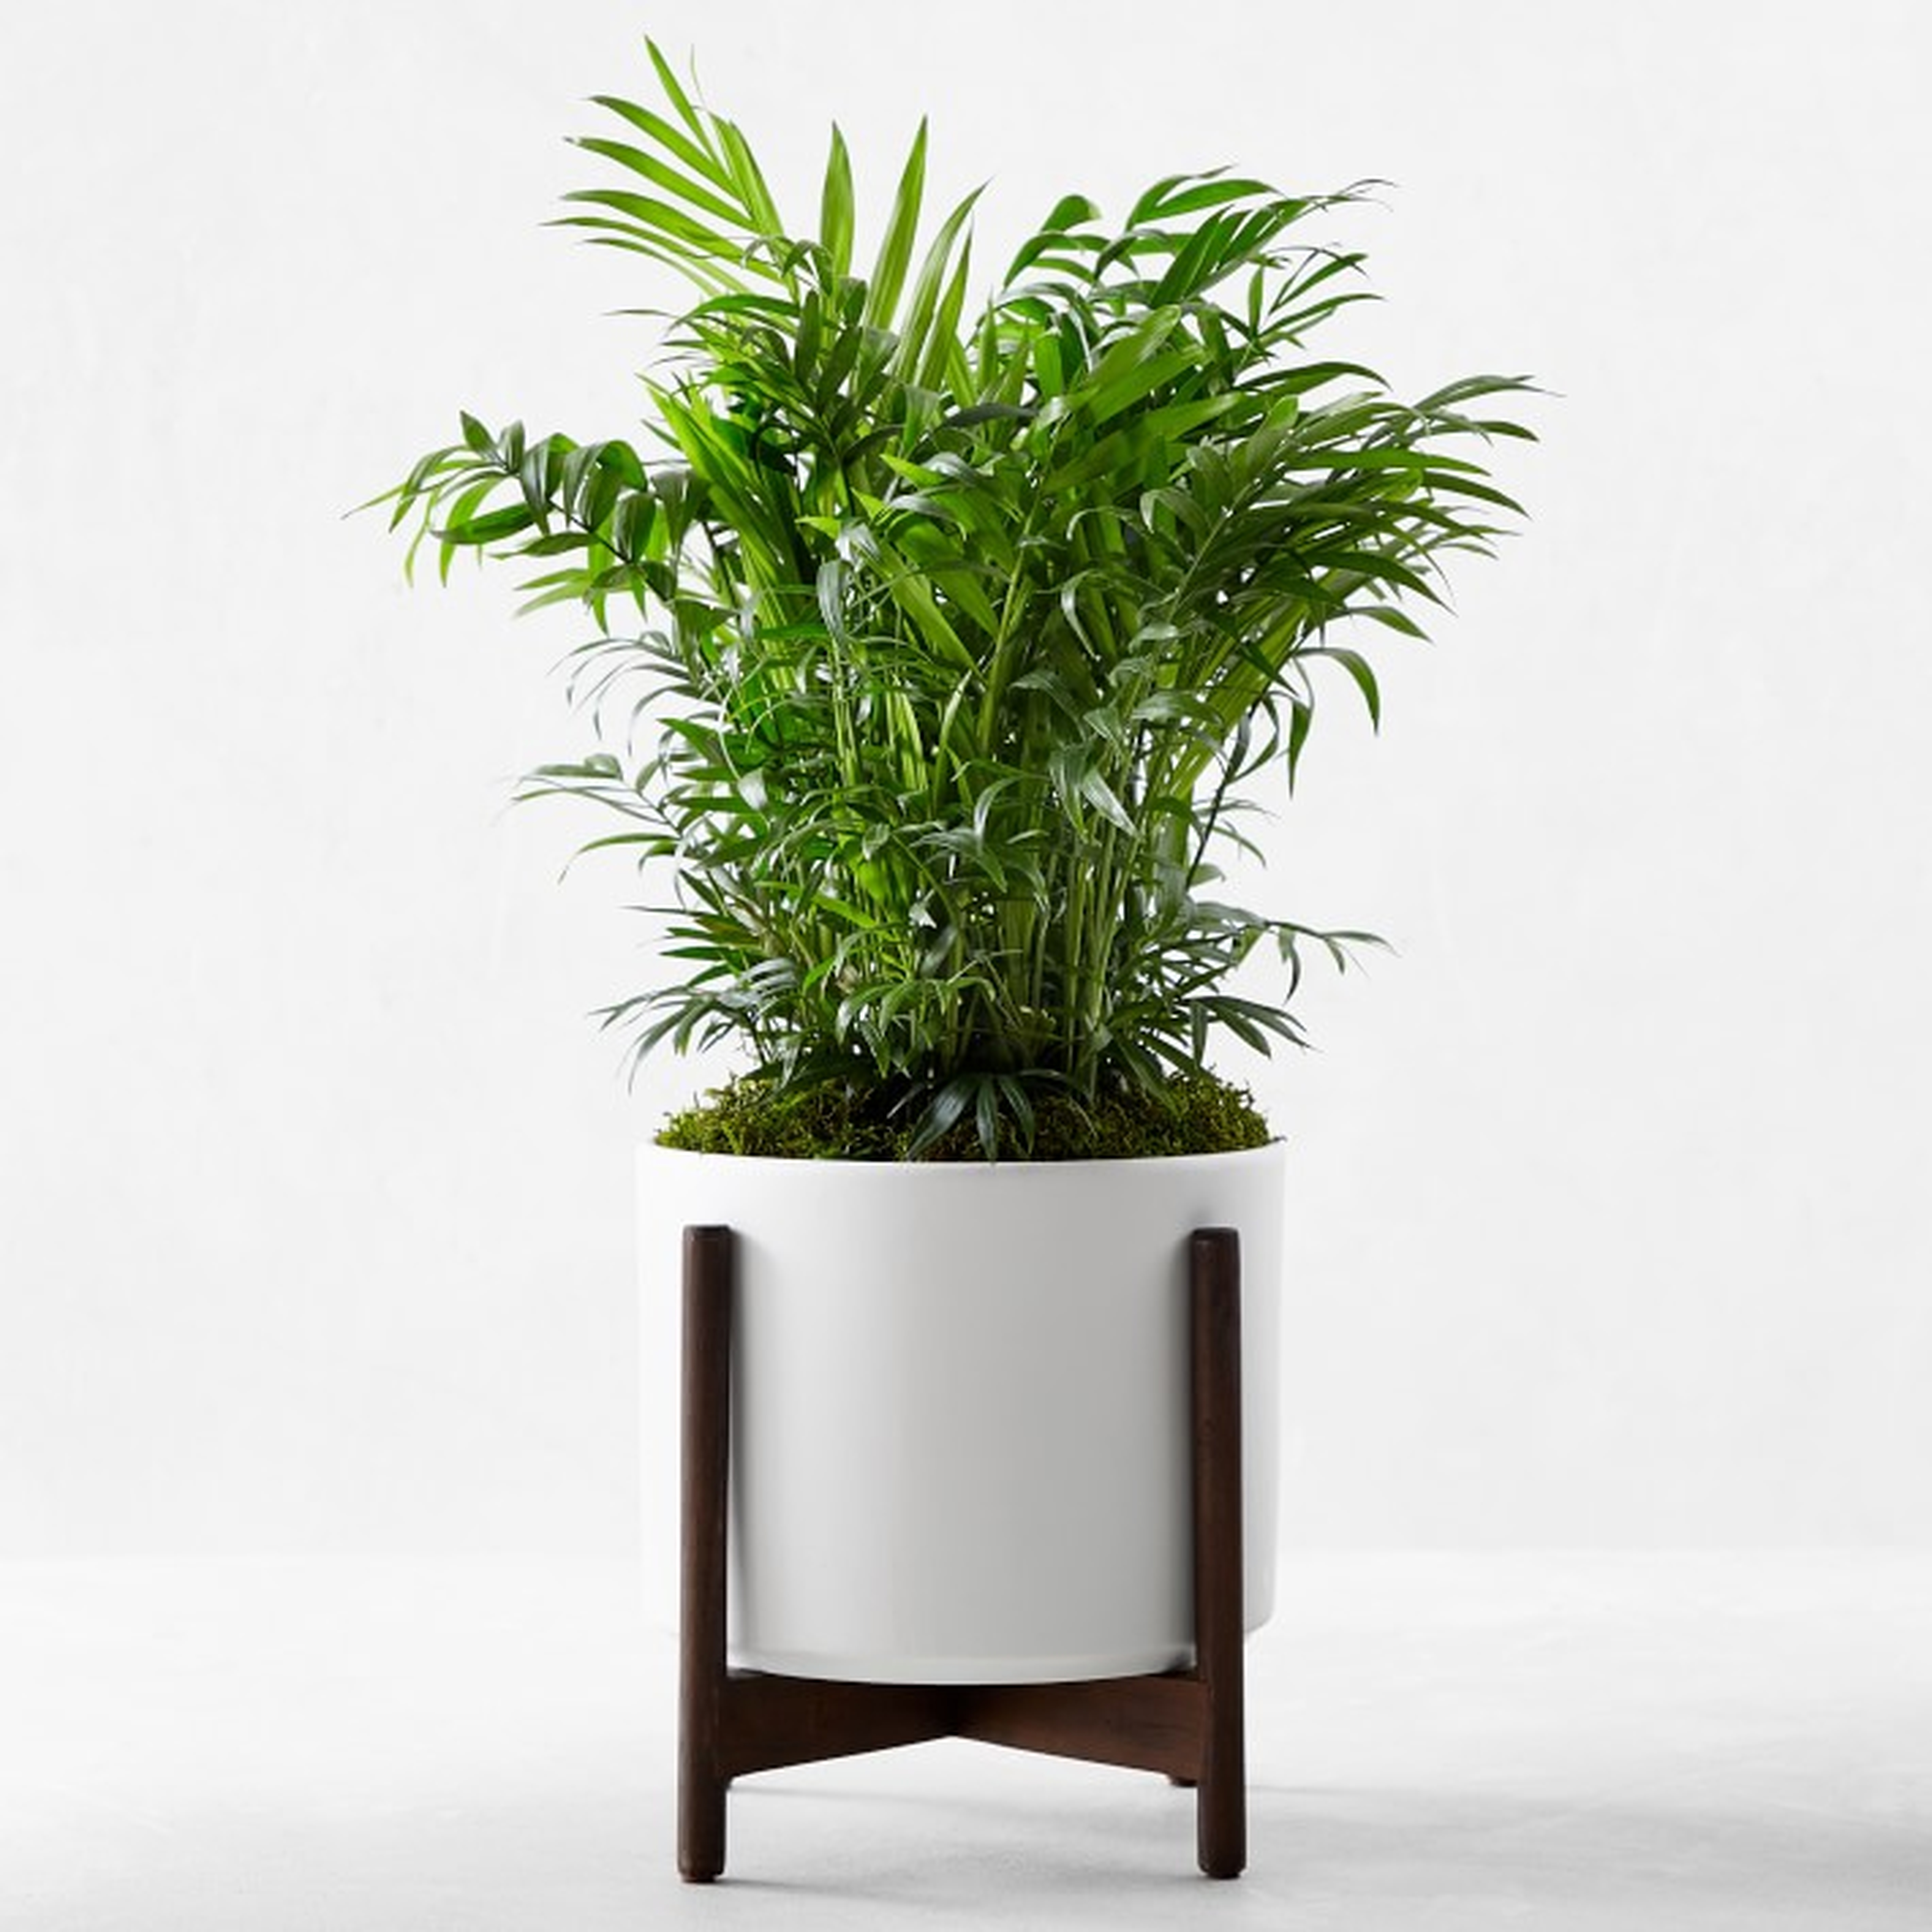 Leon &amp; George Parlor Palm Potted Plant, Small, White - Williams Sonoma